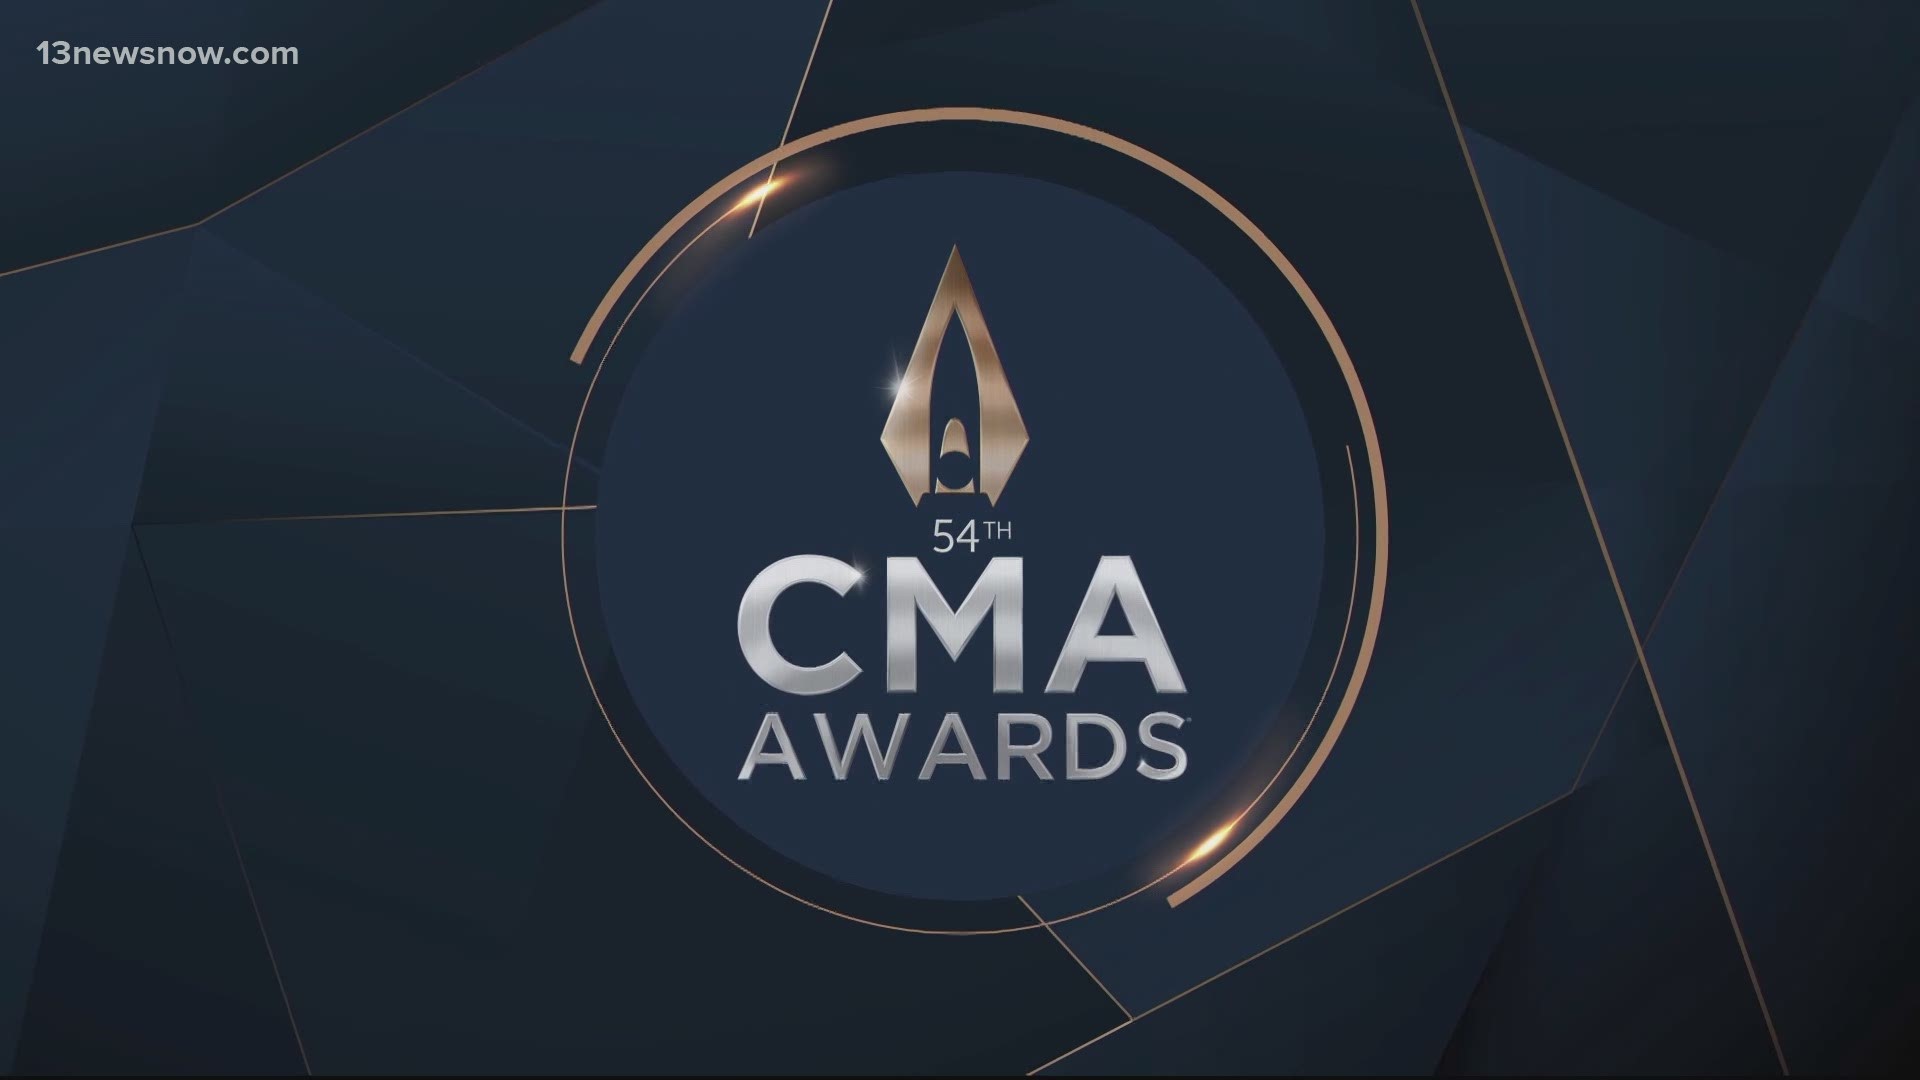 Ahead of the CMA Awards, 13News Now anchor Dan Kennedy sat down with Some Guy Named Allen over at US1061 about his predictions for the big night.